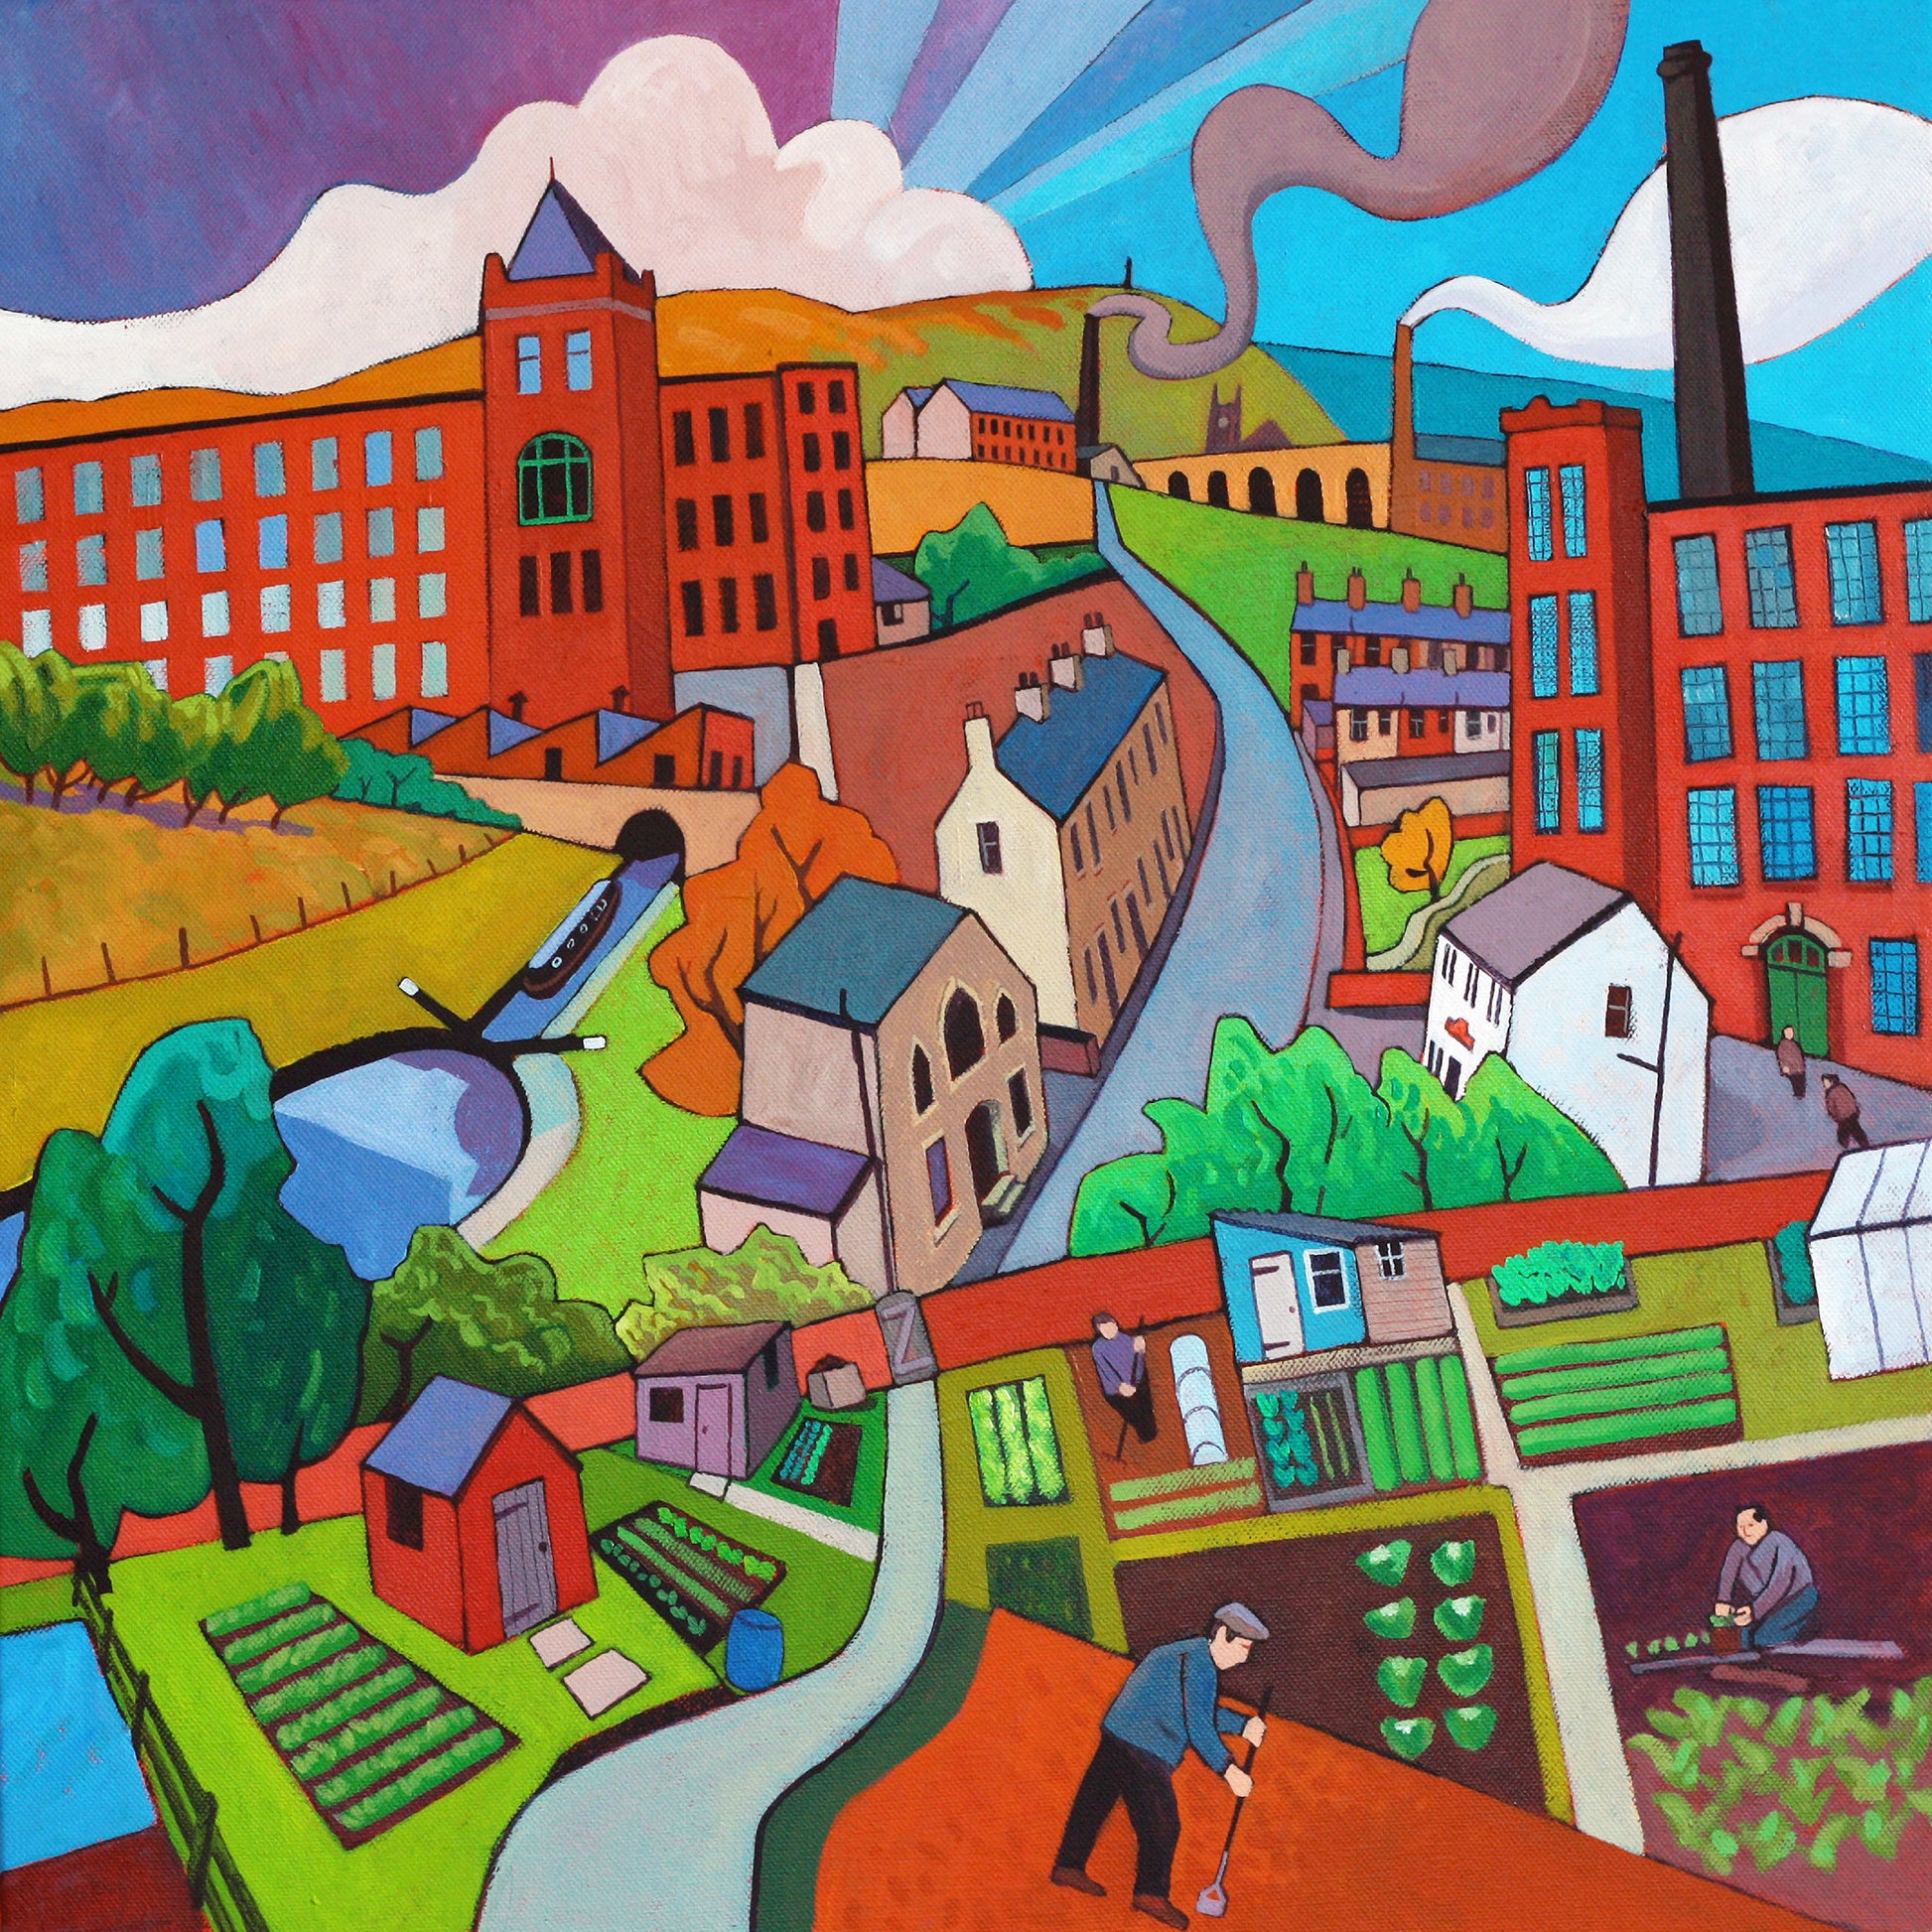 Limited edition Gicleé Print 'run of the mill' by Northern Artist Chris Cyprus. Actual size of artwork 40cm x 40cm